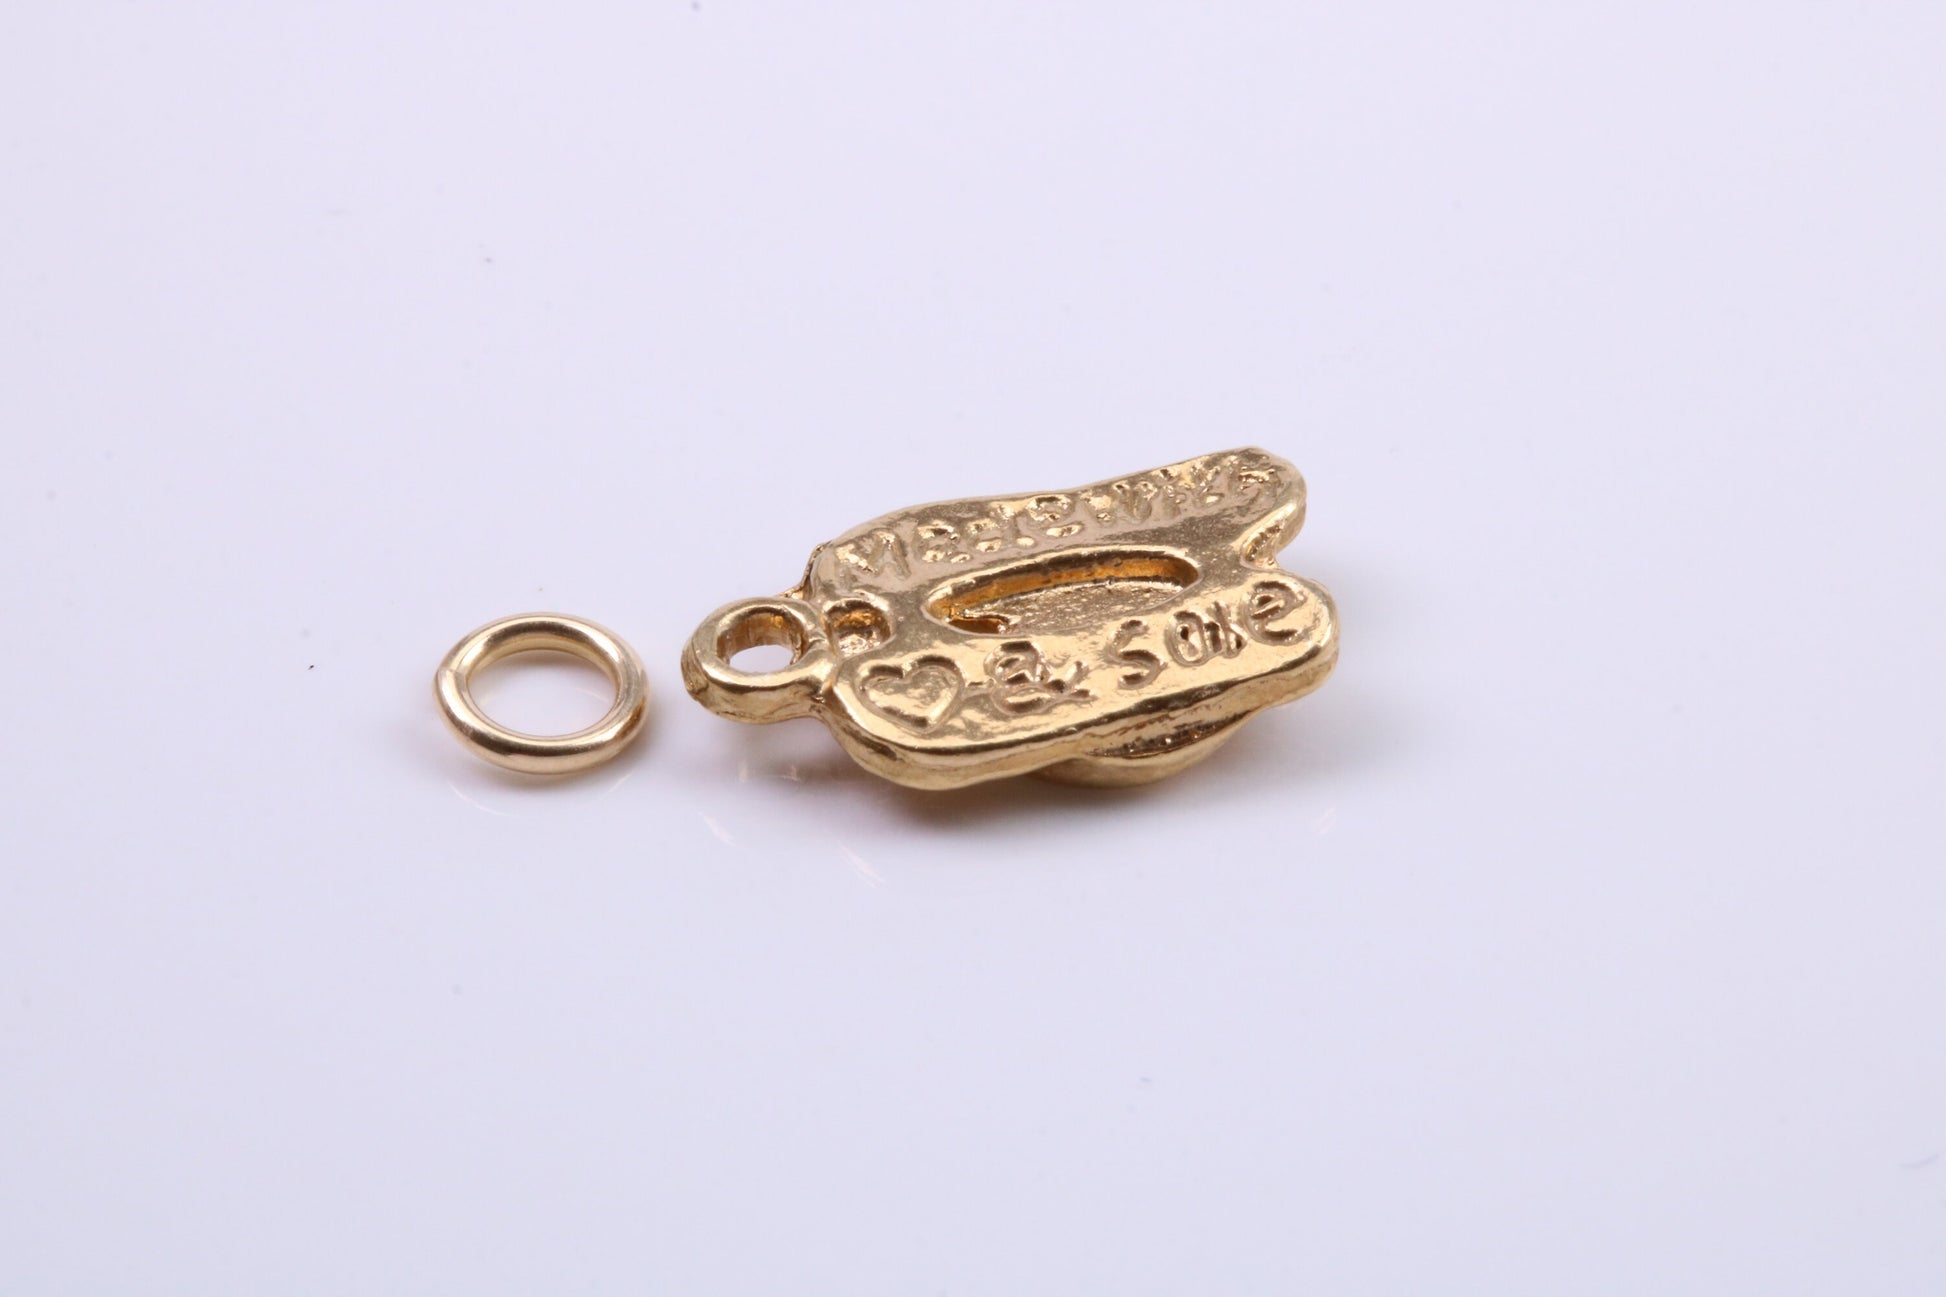 Flip Flops Charm, Traditional Charm, Made from Solid 9ct Yellow Gold, British Hallmarked, Complete with Attachment Link